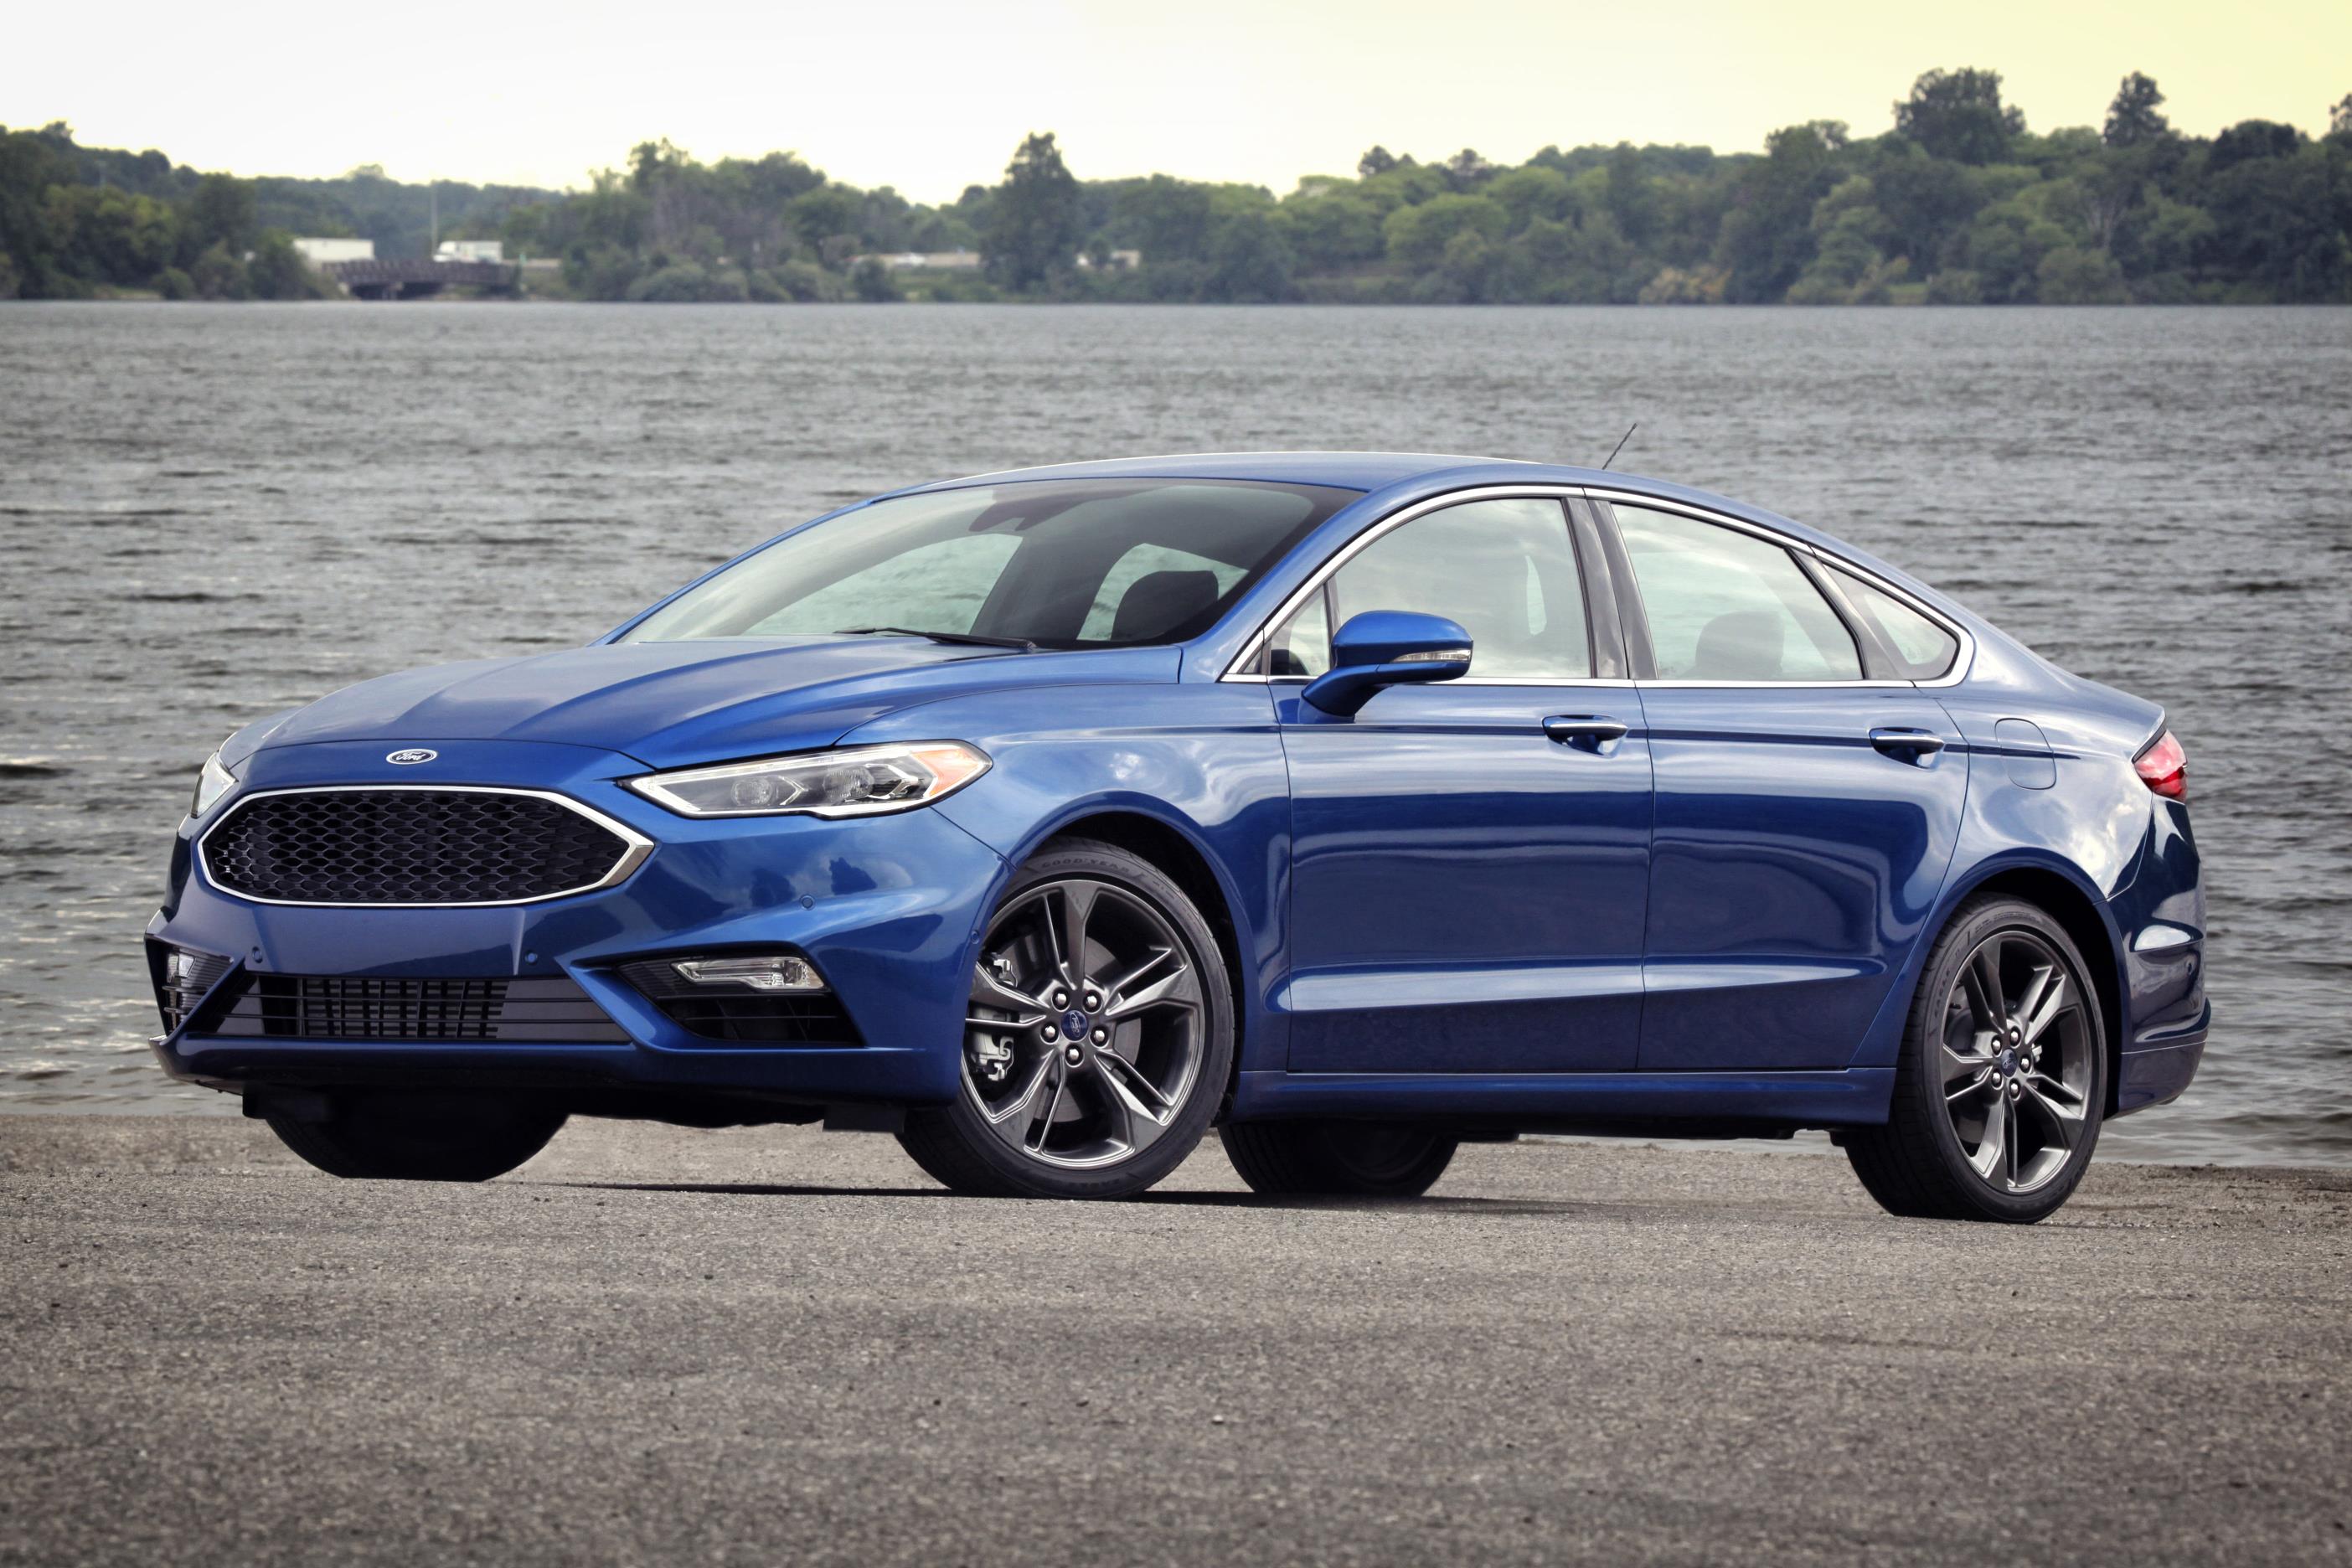 The Ford Fusion, one of Ford's top selling vehicles in the USA in 2017